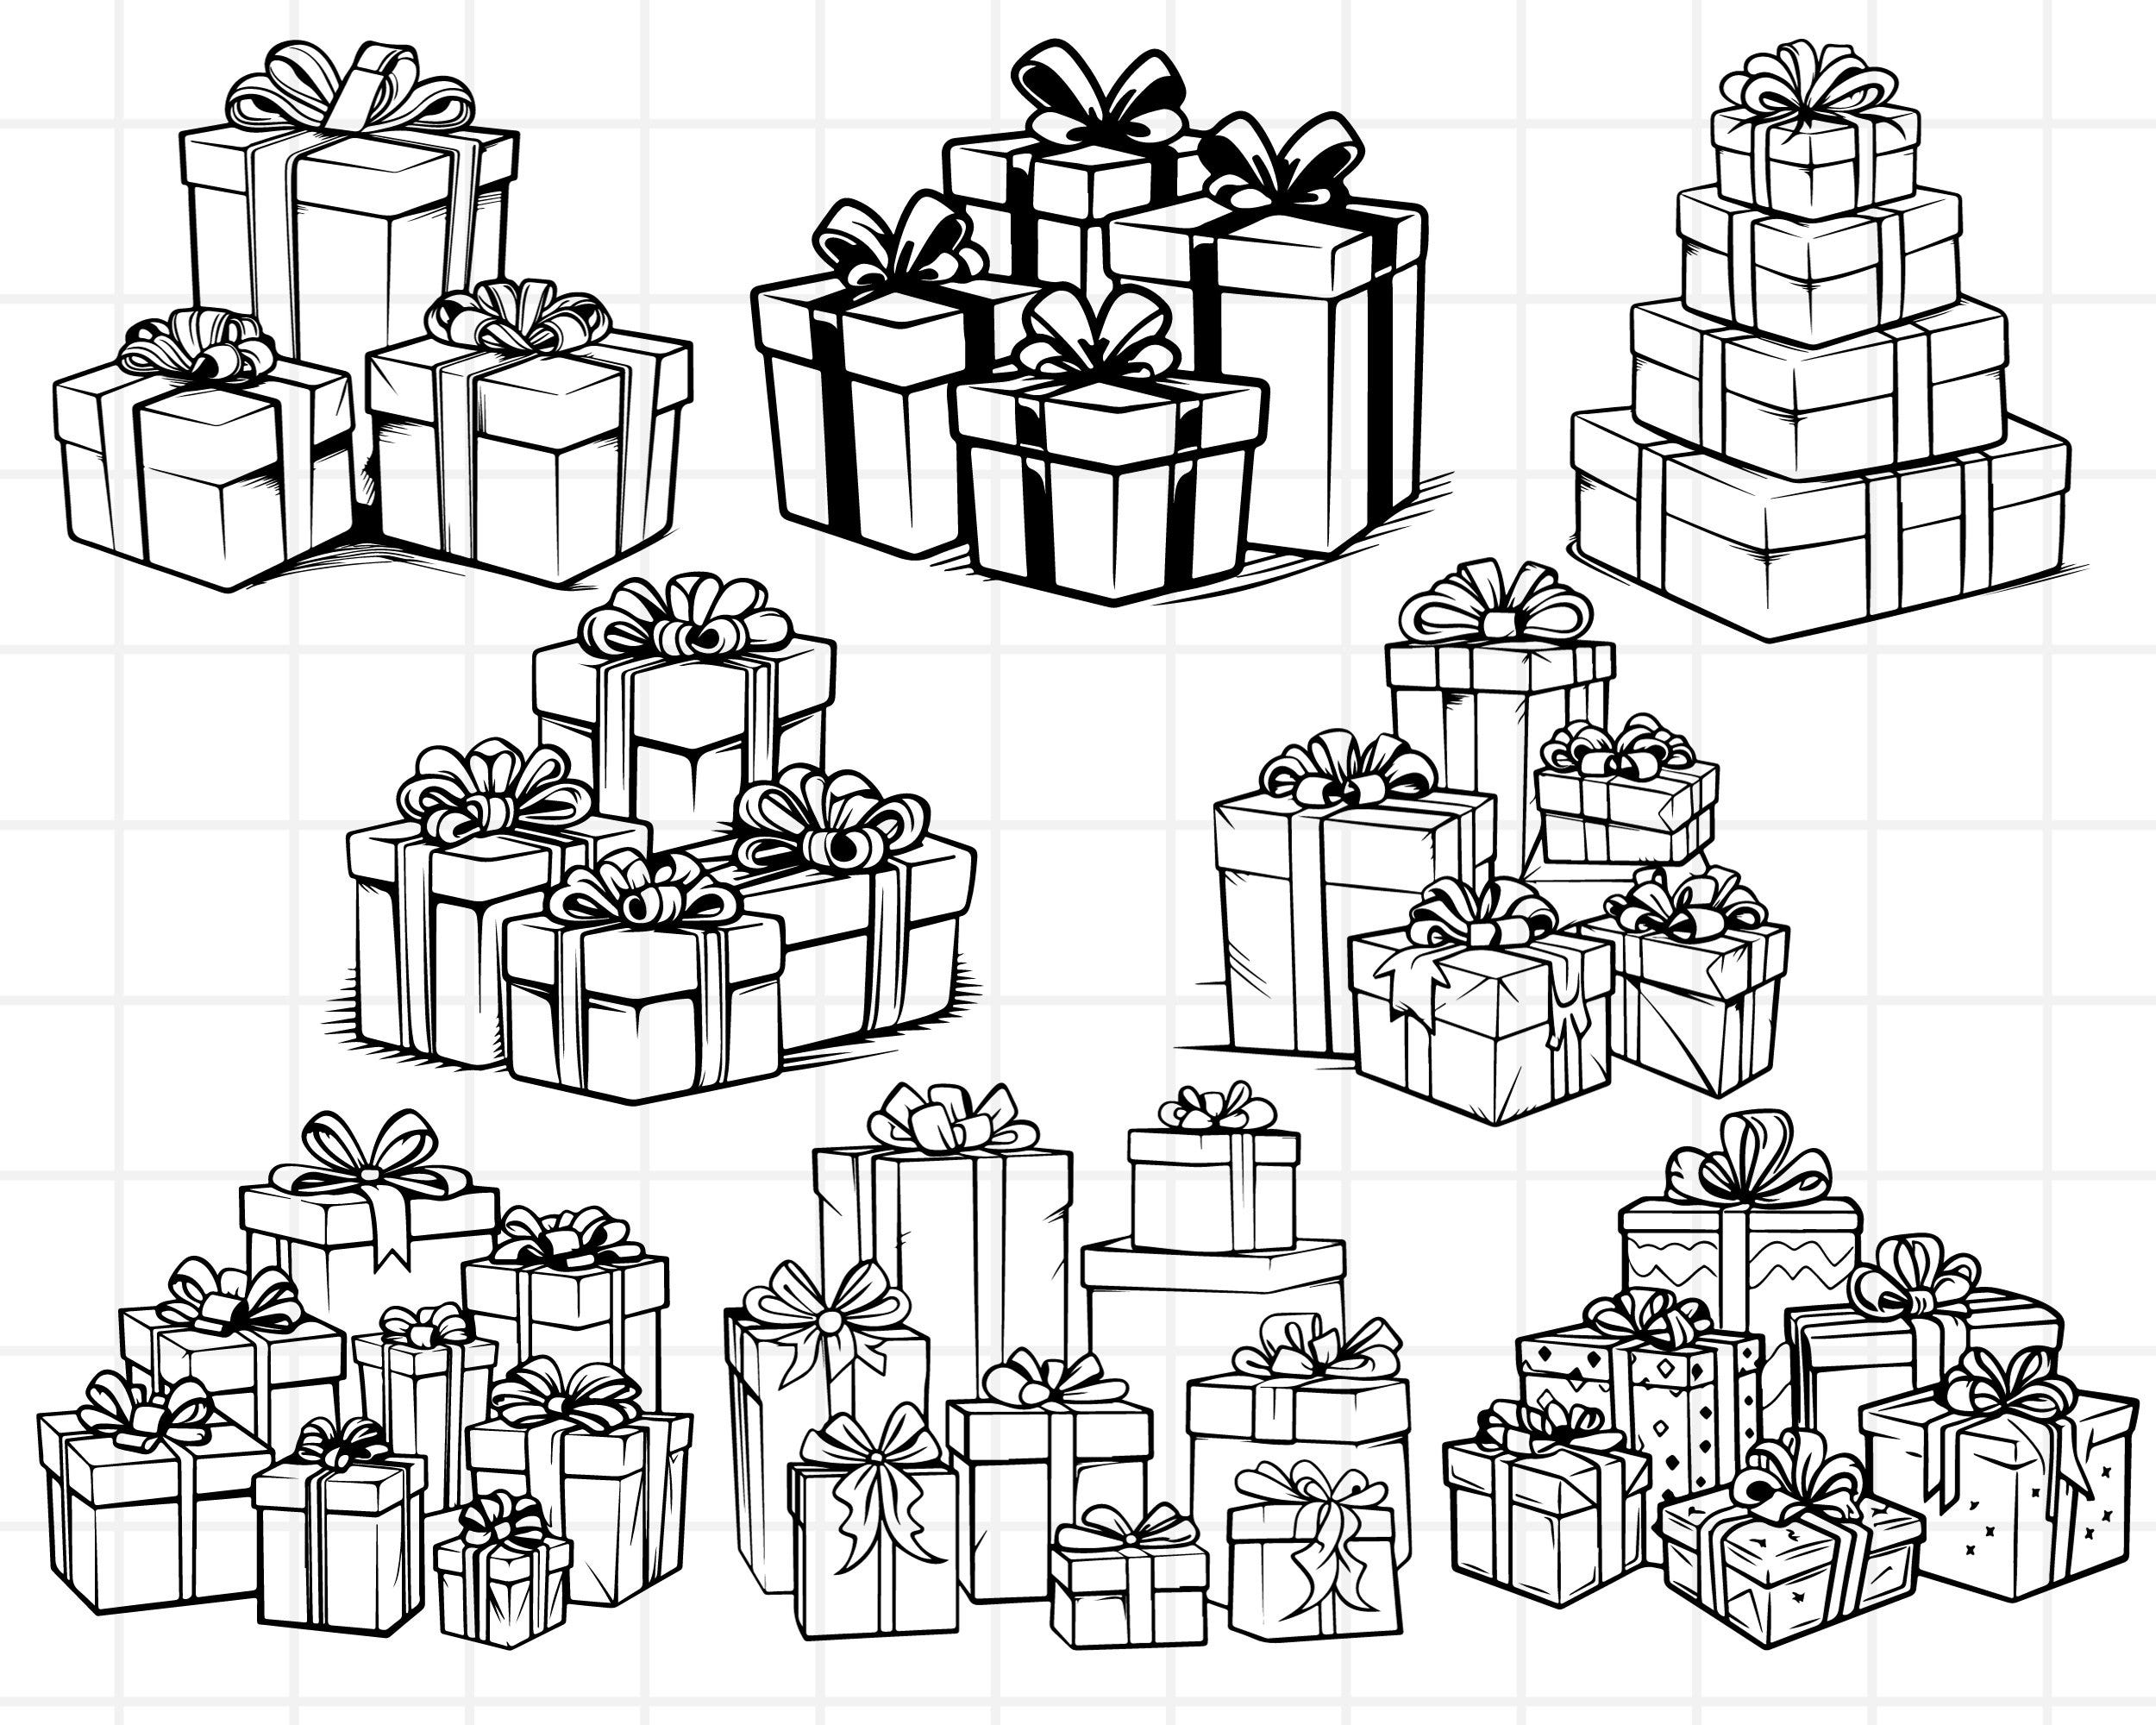 STACKED PRESENTS SVG - pile of presents for christmas or birthdays - presents with ribbons bundle svg - gifts line art vectors